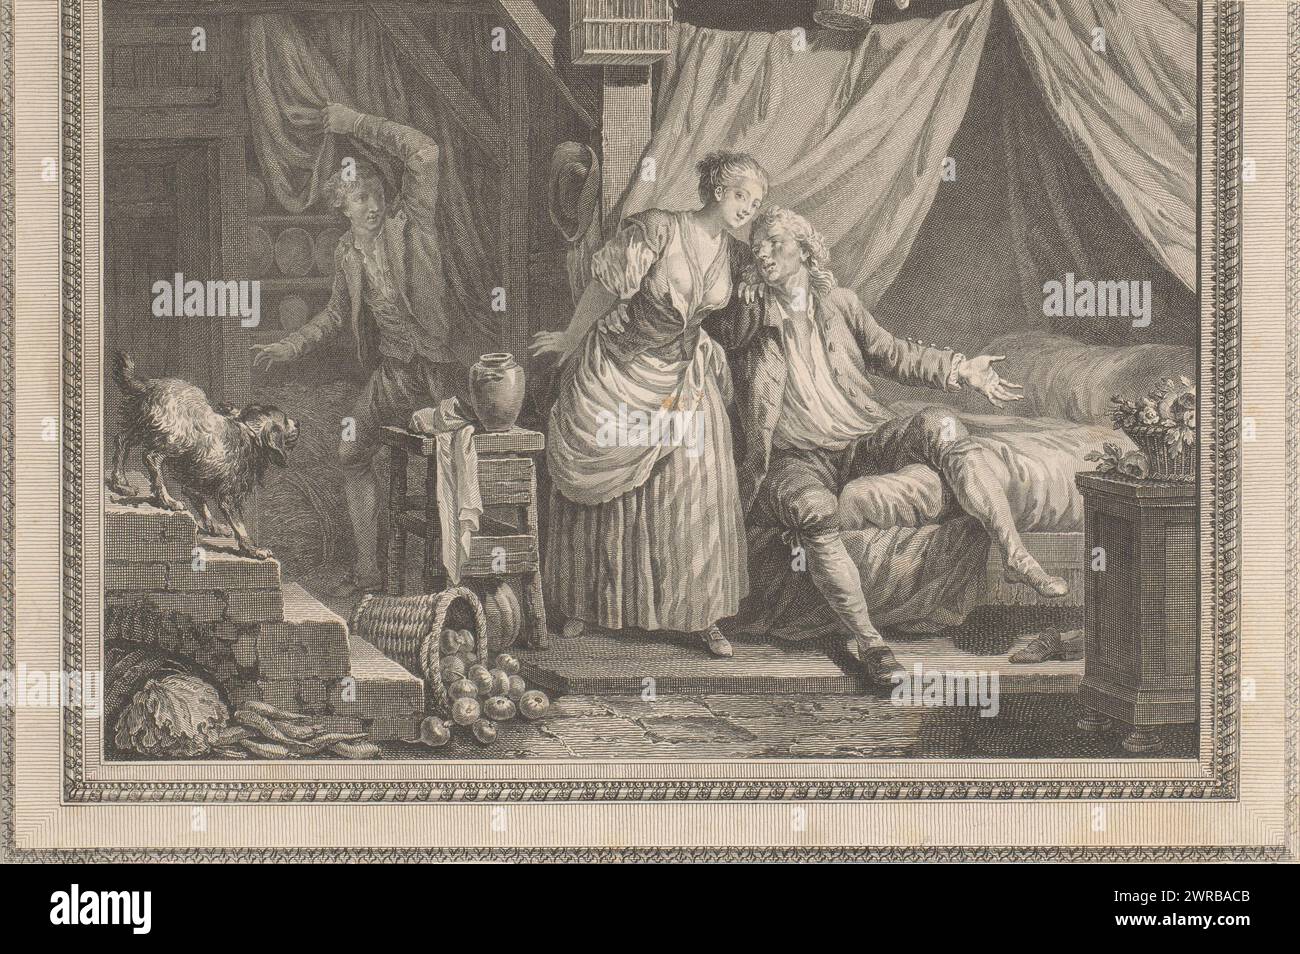 Bedroom with couple and secretly departing lover, Le Mari dupe et content, print maker: Charles Emmanuel Patas, after design by: Jean Jacques François Le Barbier, publisher: Nicolas Ponce, 1763 - 1817, paper, etching, engraving, height 206 mm × width 305 mm, print Stock Photo